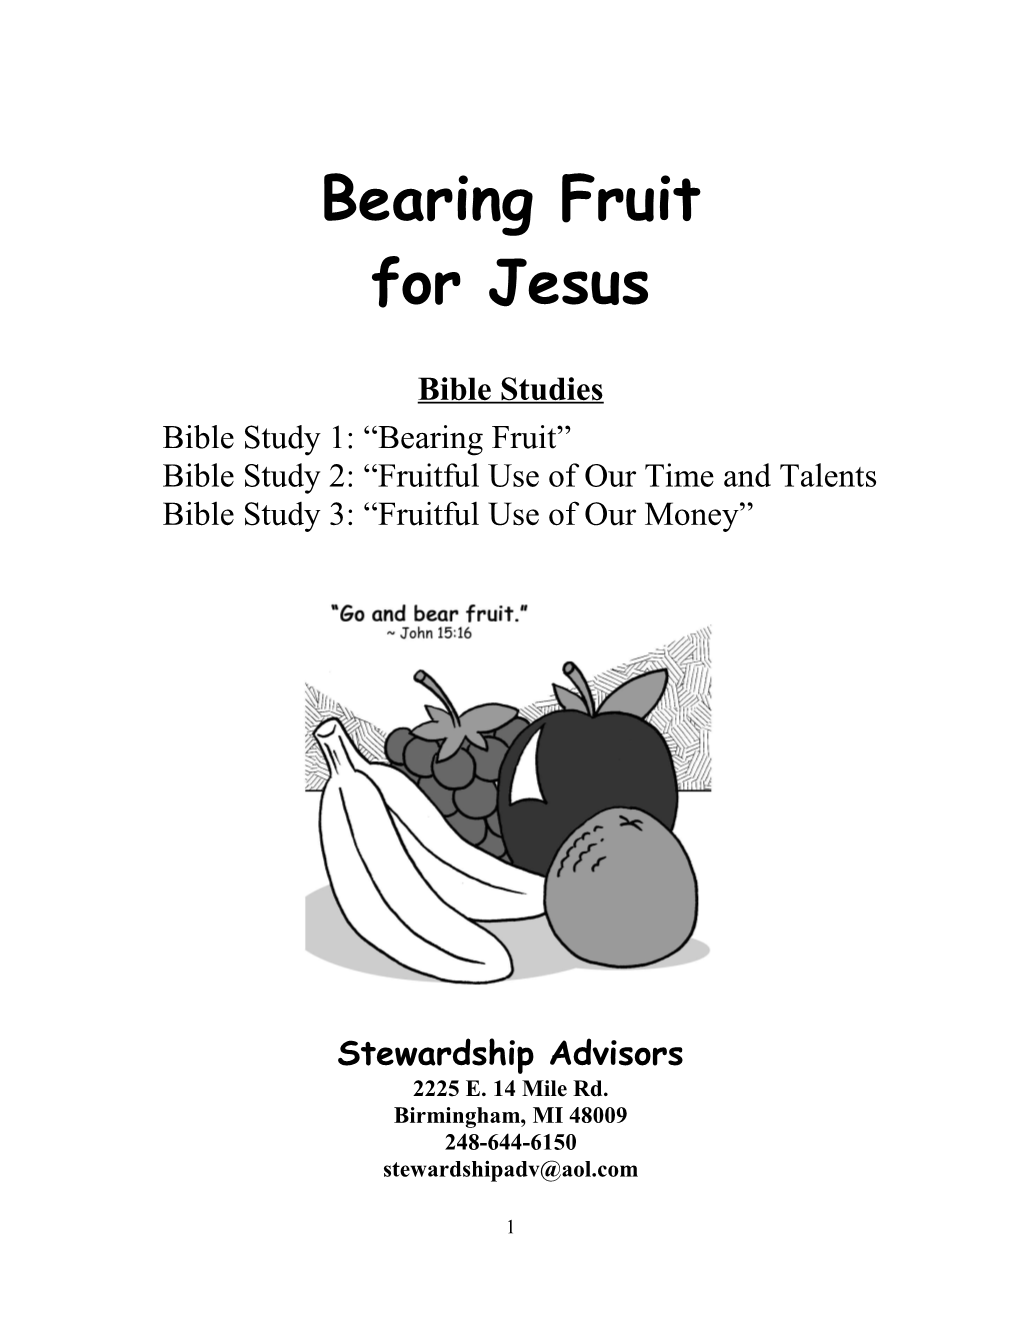 Bible Study 2: Fruitful Use of Our Time and Talents